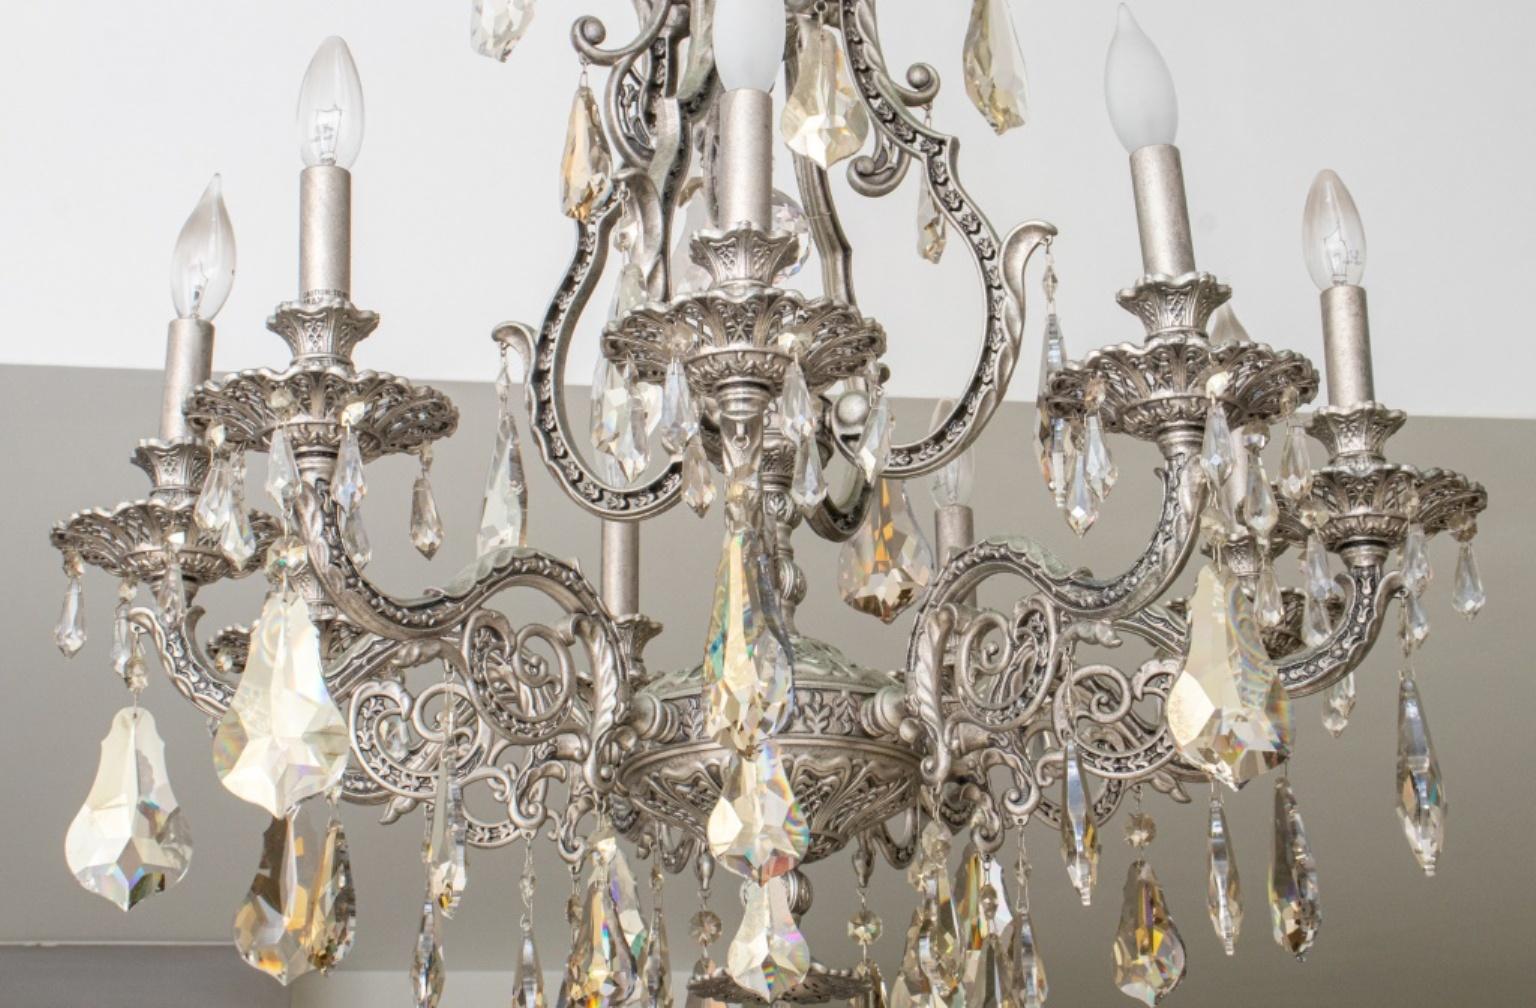 French Rococo Revival crystal chandelier with chased silvered metal frame, eight arms topped with faux candles, with dangling cut glass crystals. In good condition. Wear consistent with age and use. Hardwired.
Dimensions: 30